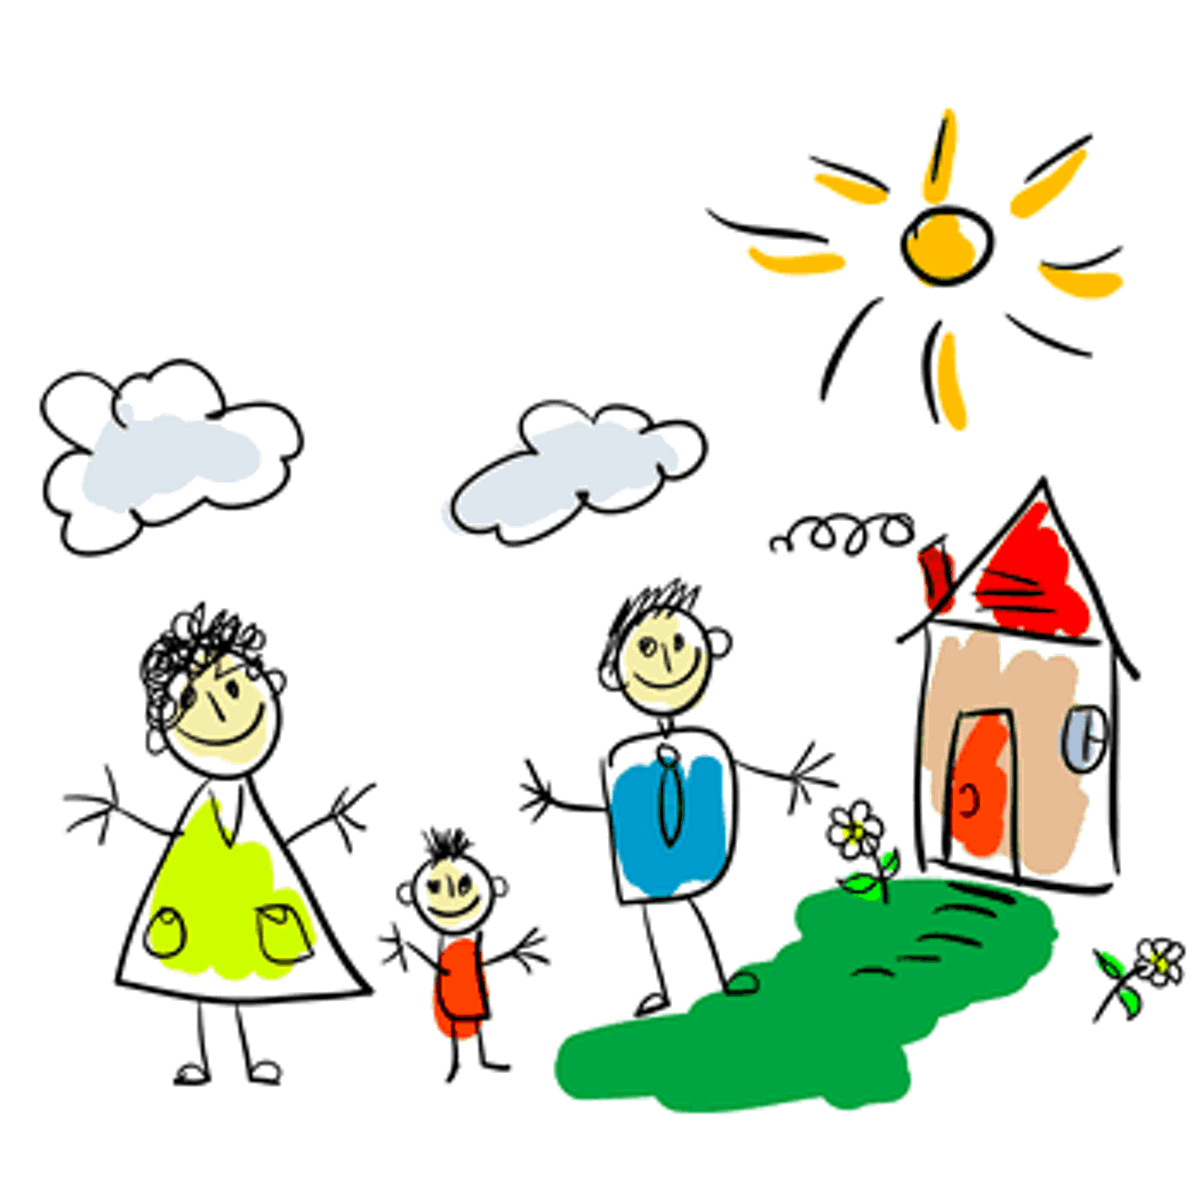 Family Cartoon Picture - ClipArt Best